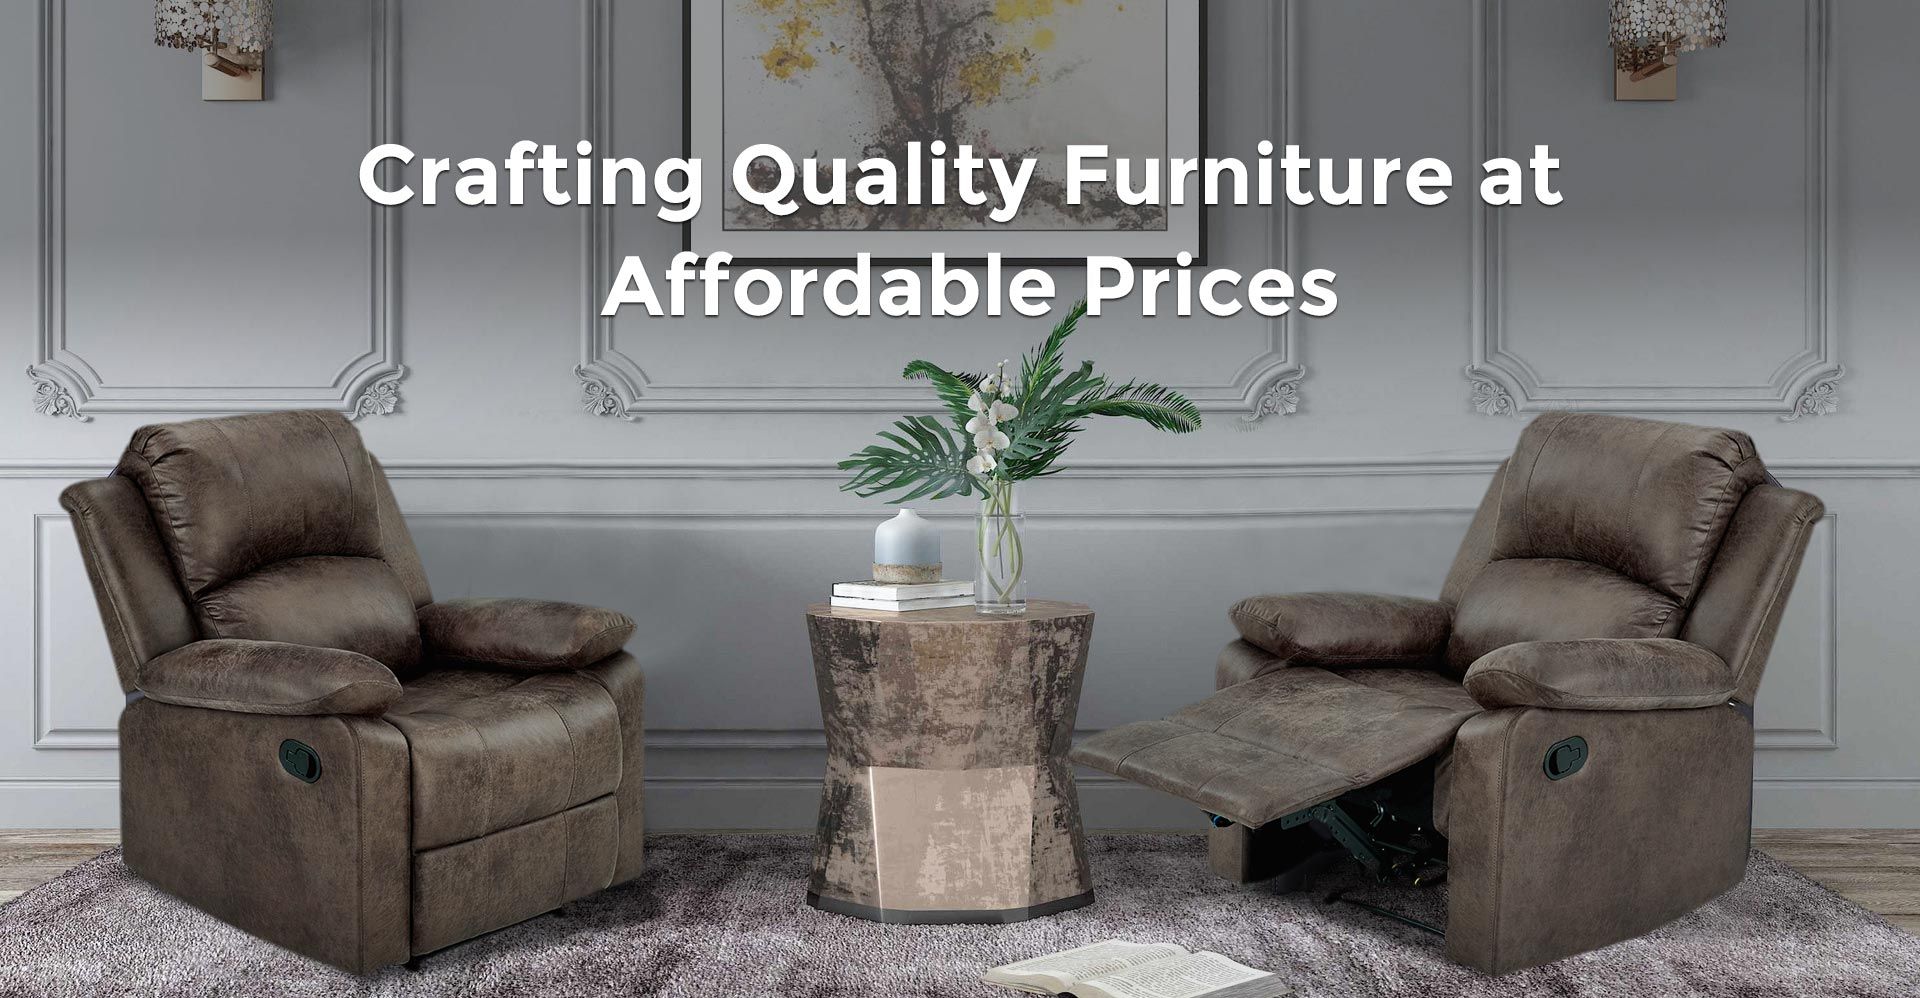 Crafting quality furniture at affordable prices